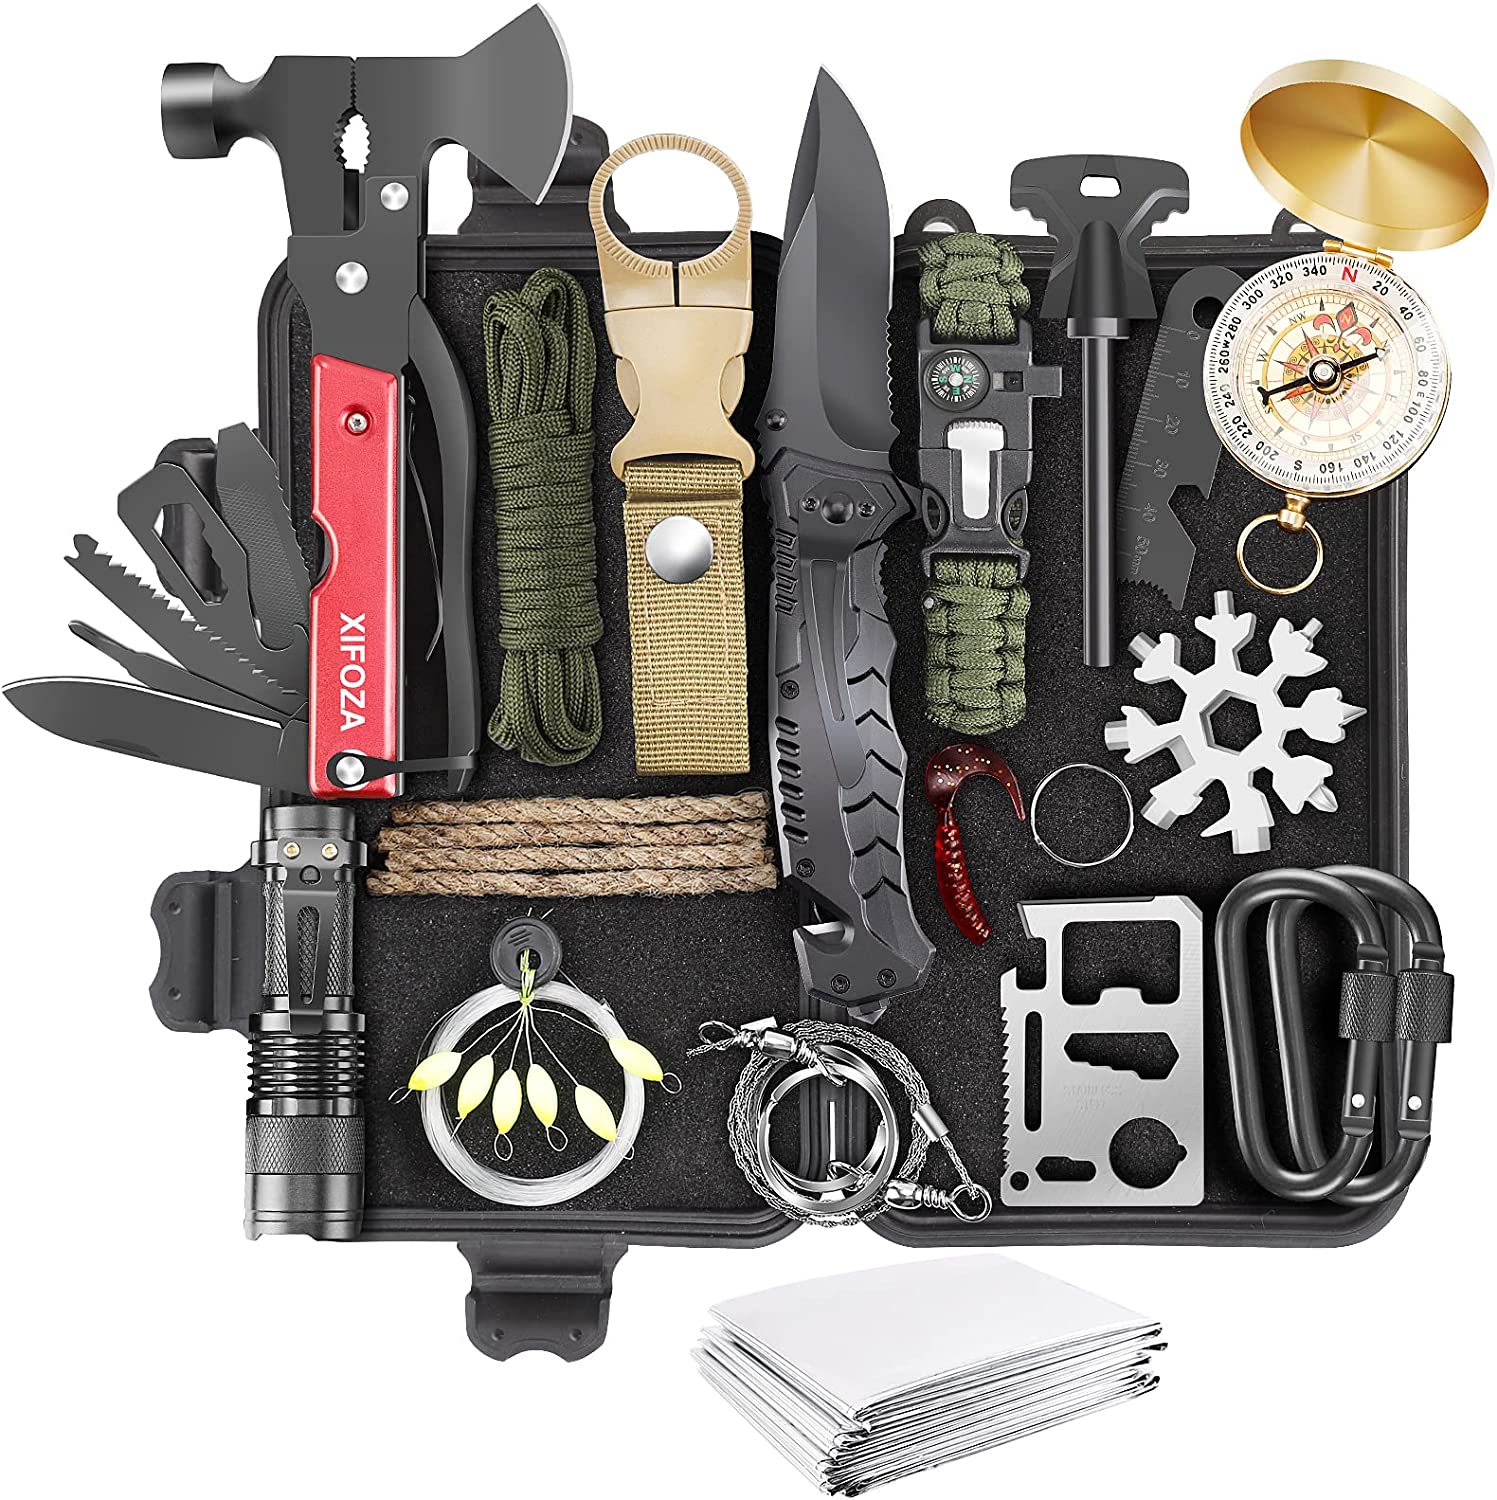 Gifts for Men Dad Husband, Survival Kits 27 in 1 Camping Accessories Tactical Gear Fishing Equipment for Camping Hiking Hunting Outdoor Adventure, Christmas Thanksgiving Day Birthday Gifts idea